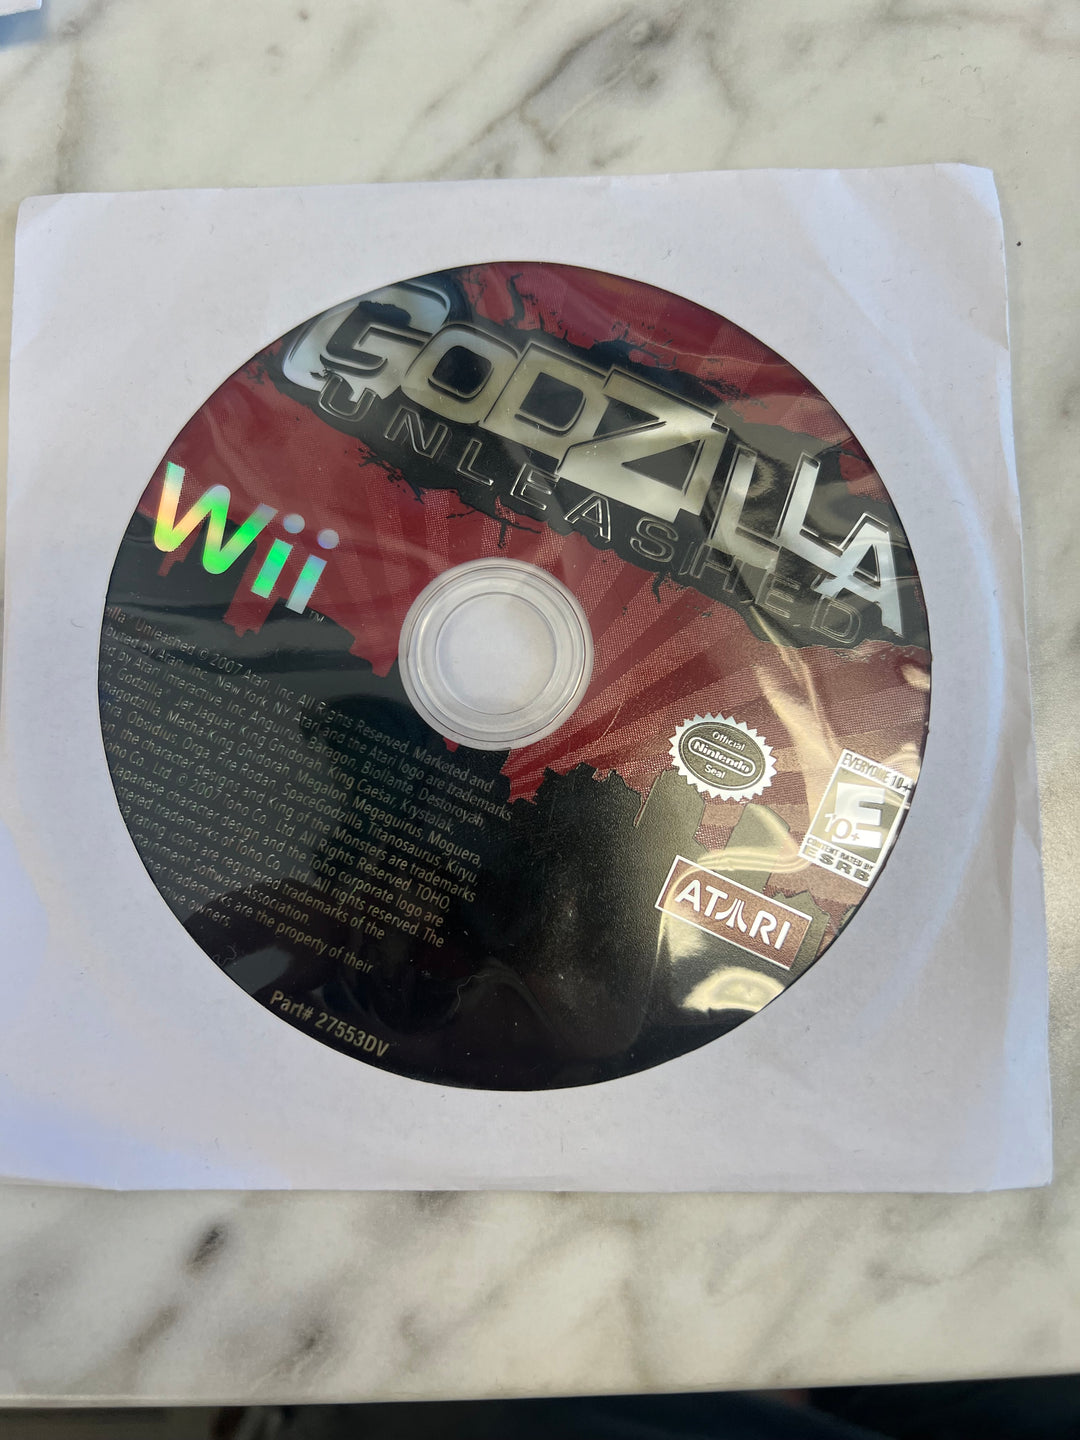 Godzilla Unleashed Wii Disc Only No Case/Manual DU62724